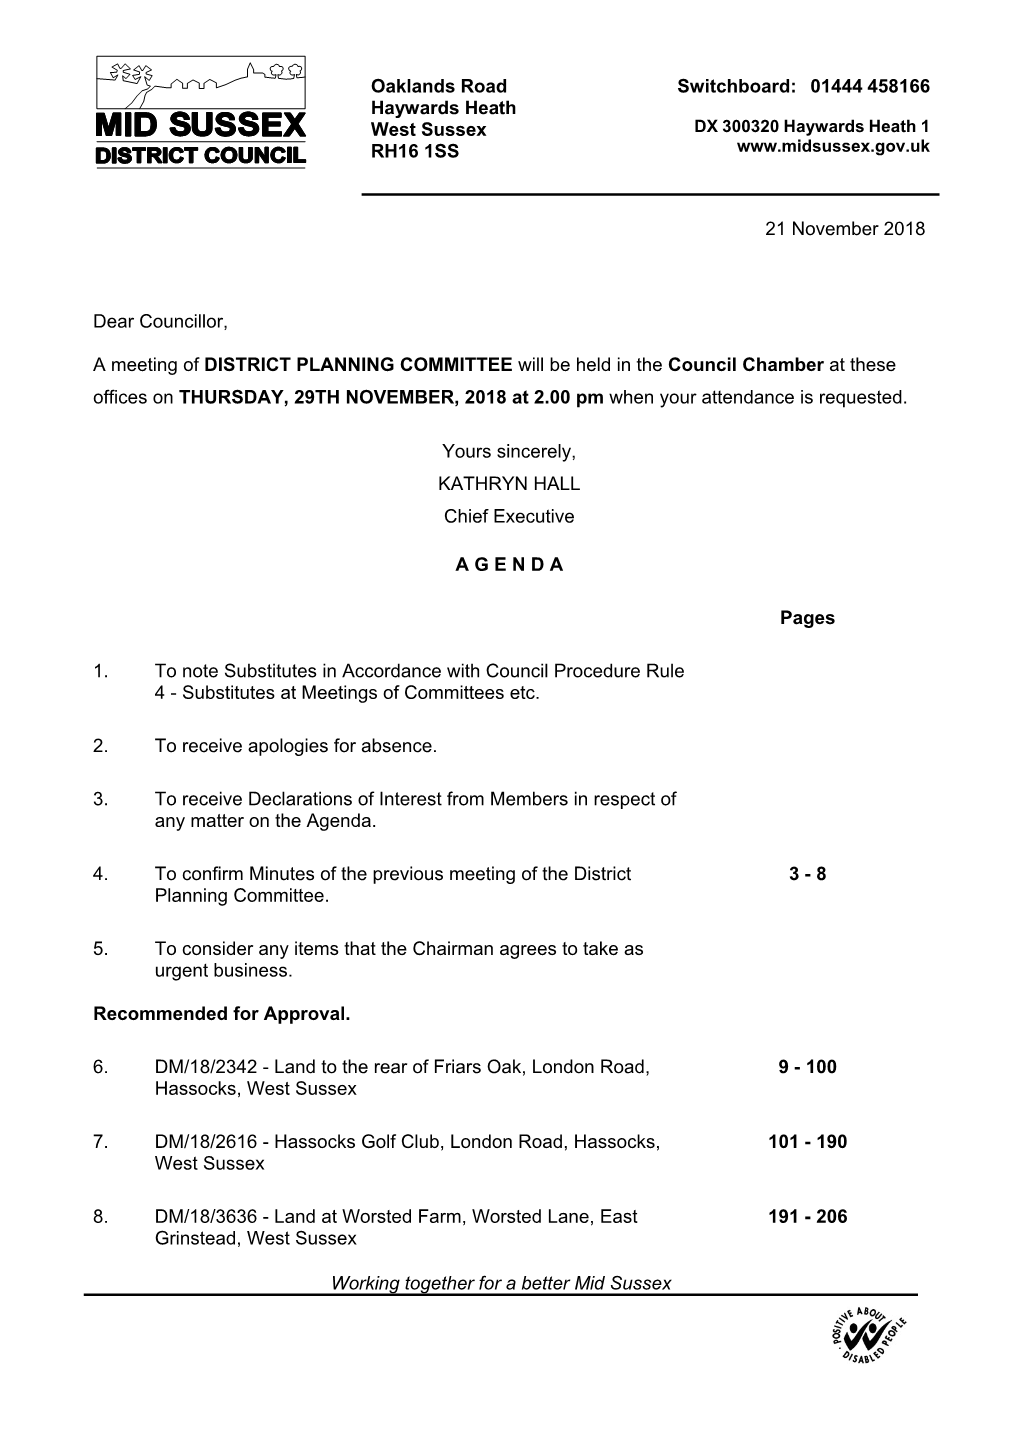 (Public Pack)Agenda Document for District Planning Committee, 29/11/2018 14:00